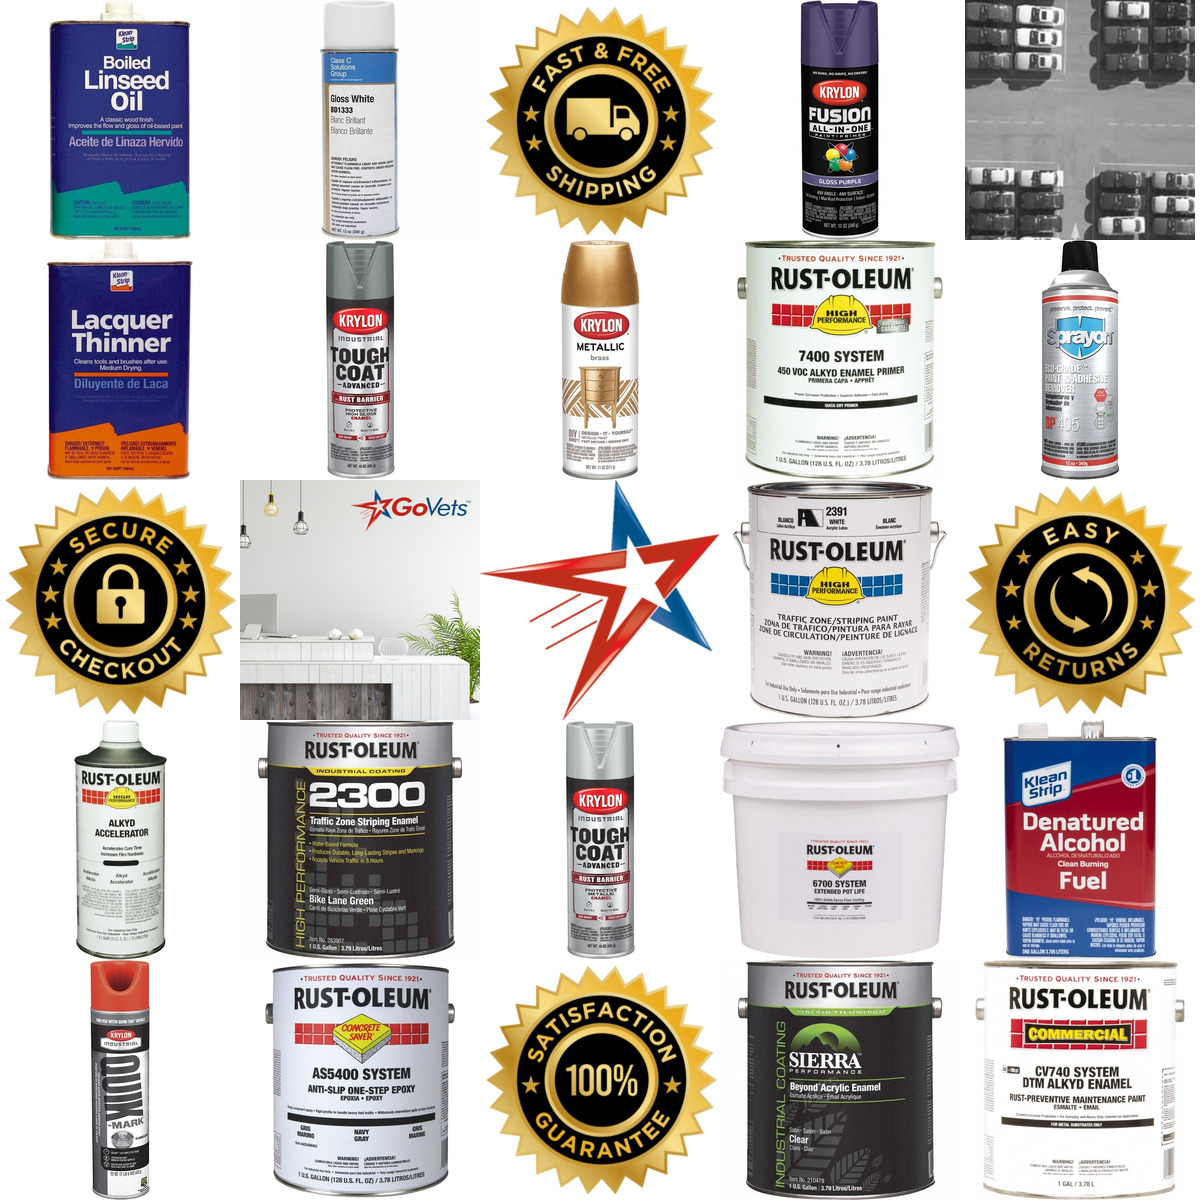 A selection of Paints Coatings and Painting Chemicals products on GoVets